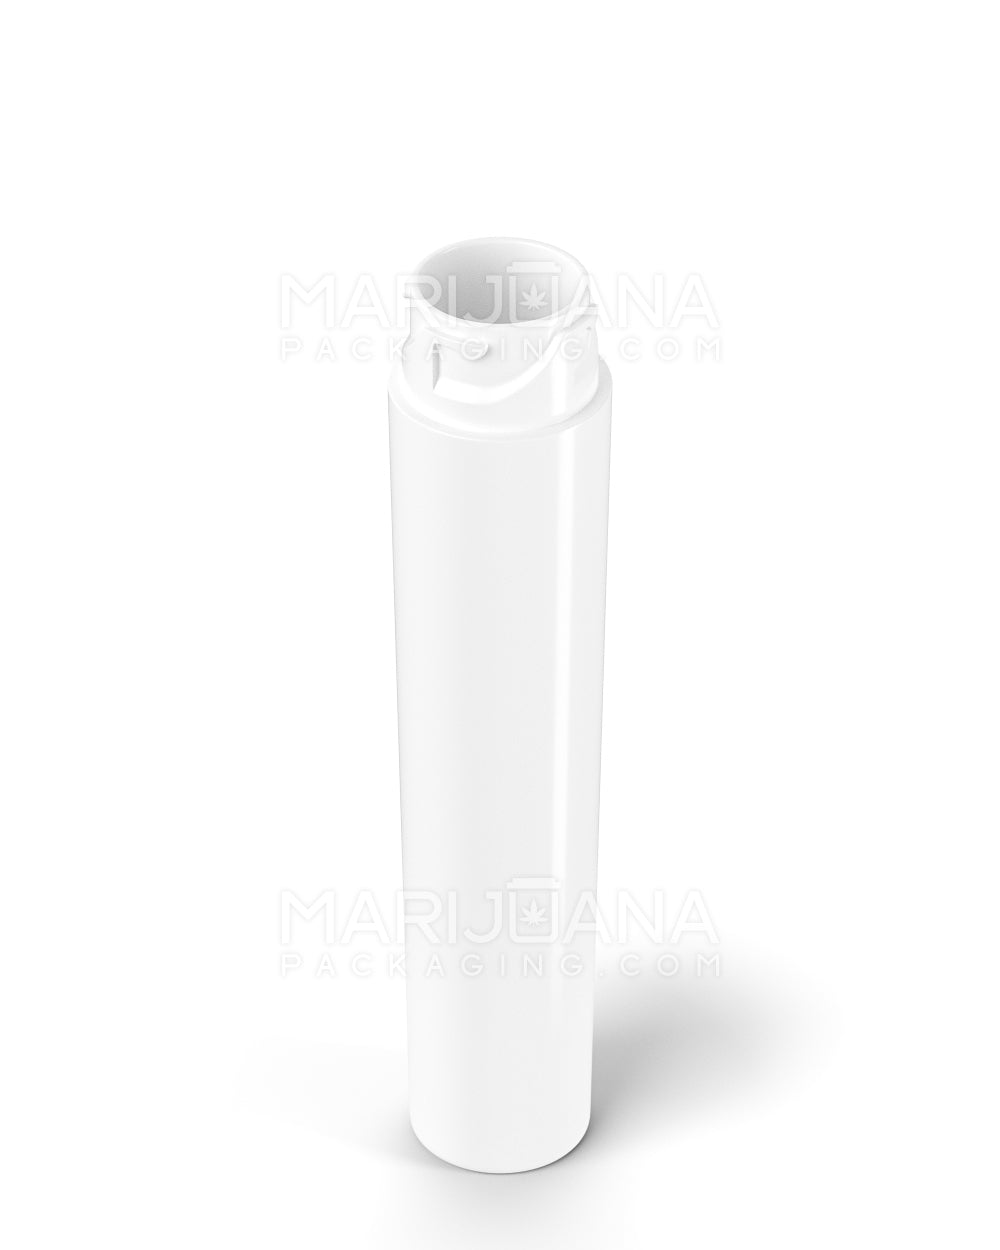 Child Resistant | Push Down & Turn Vape Cartridge Container | 72mm - White Plastic - 1650 Count - 7